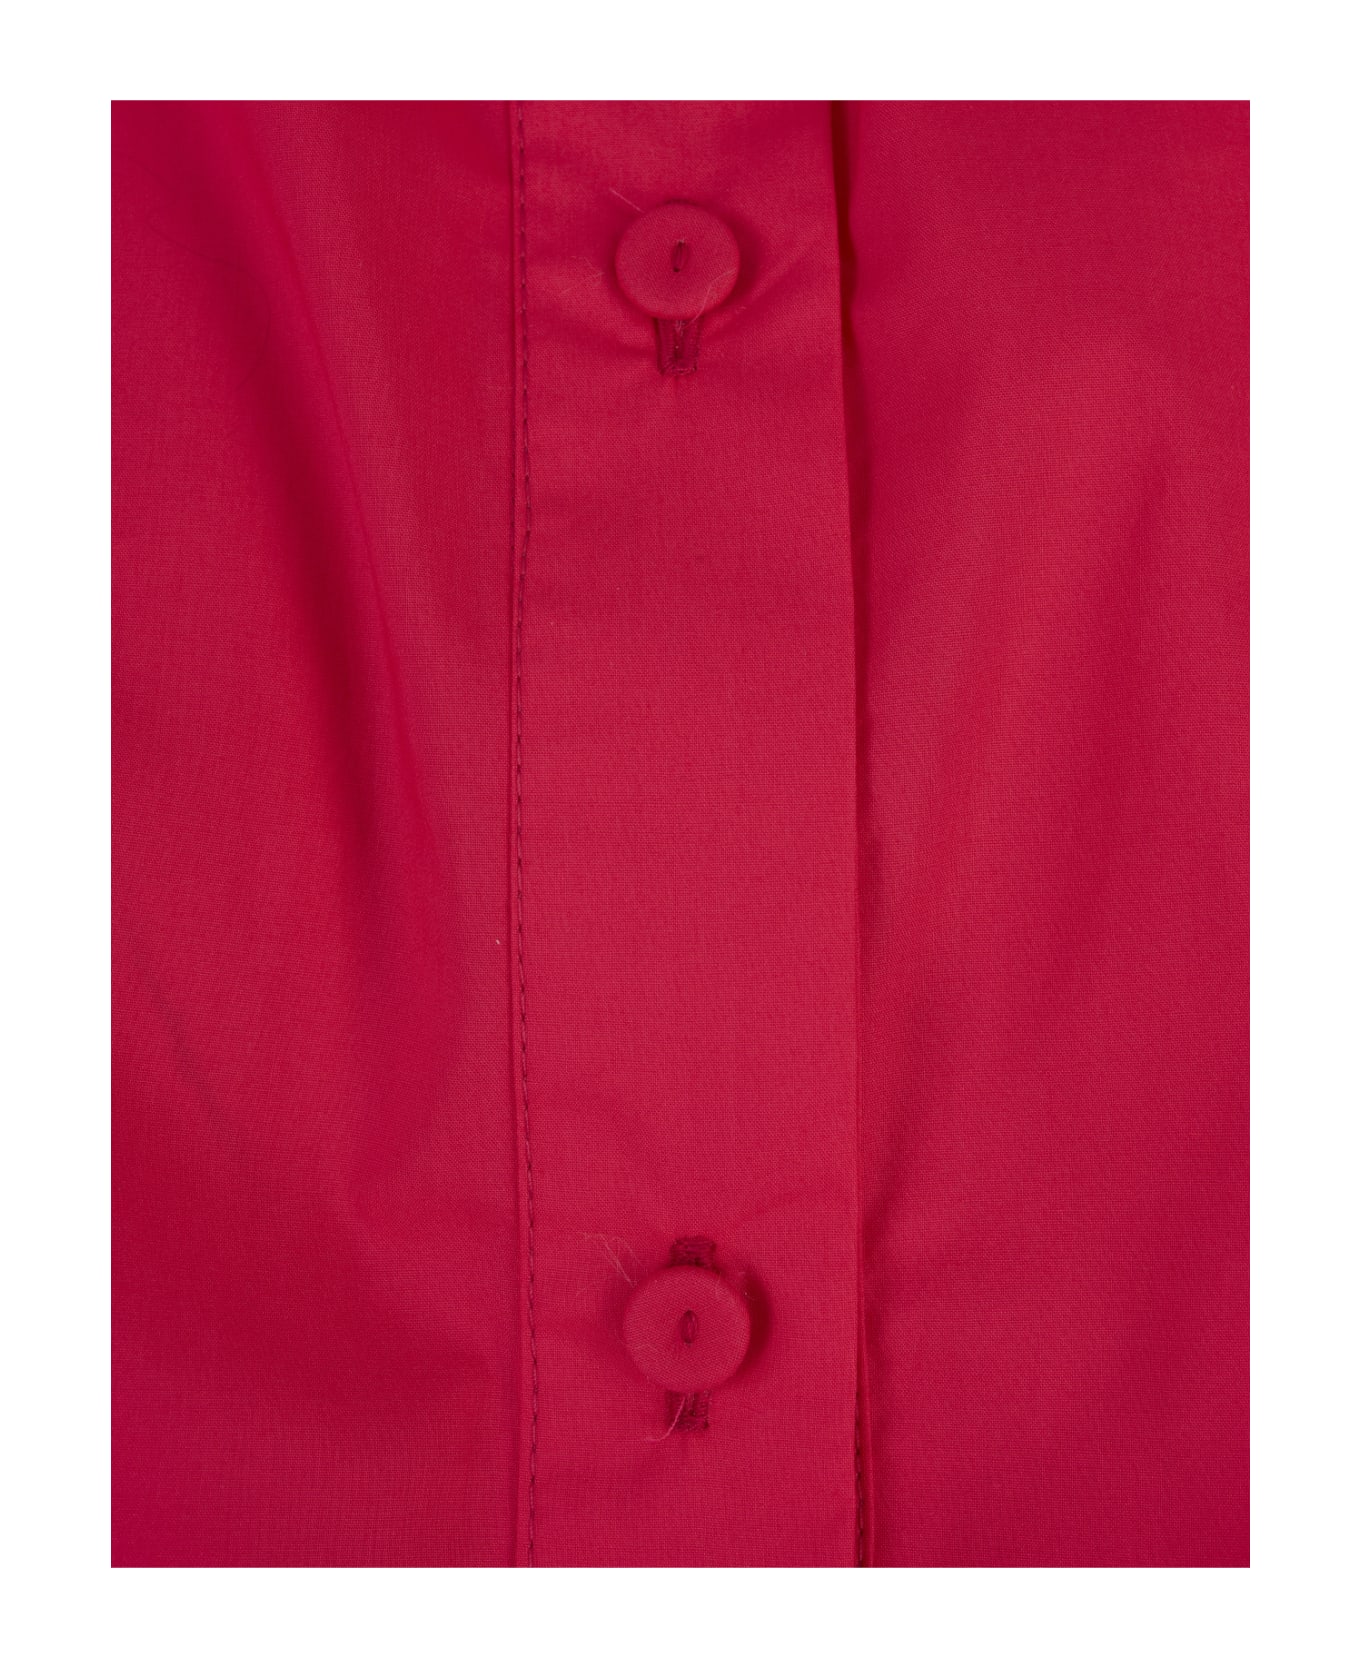 Alessandro Enriquez Red Popelin Shirt With Knot - Red